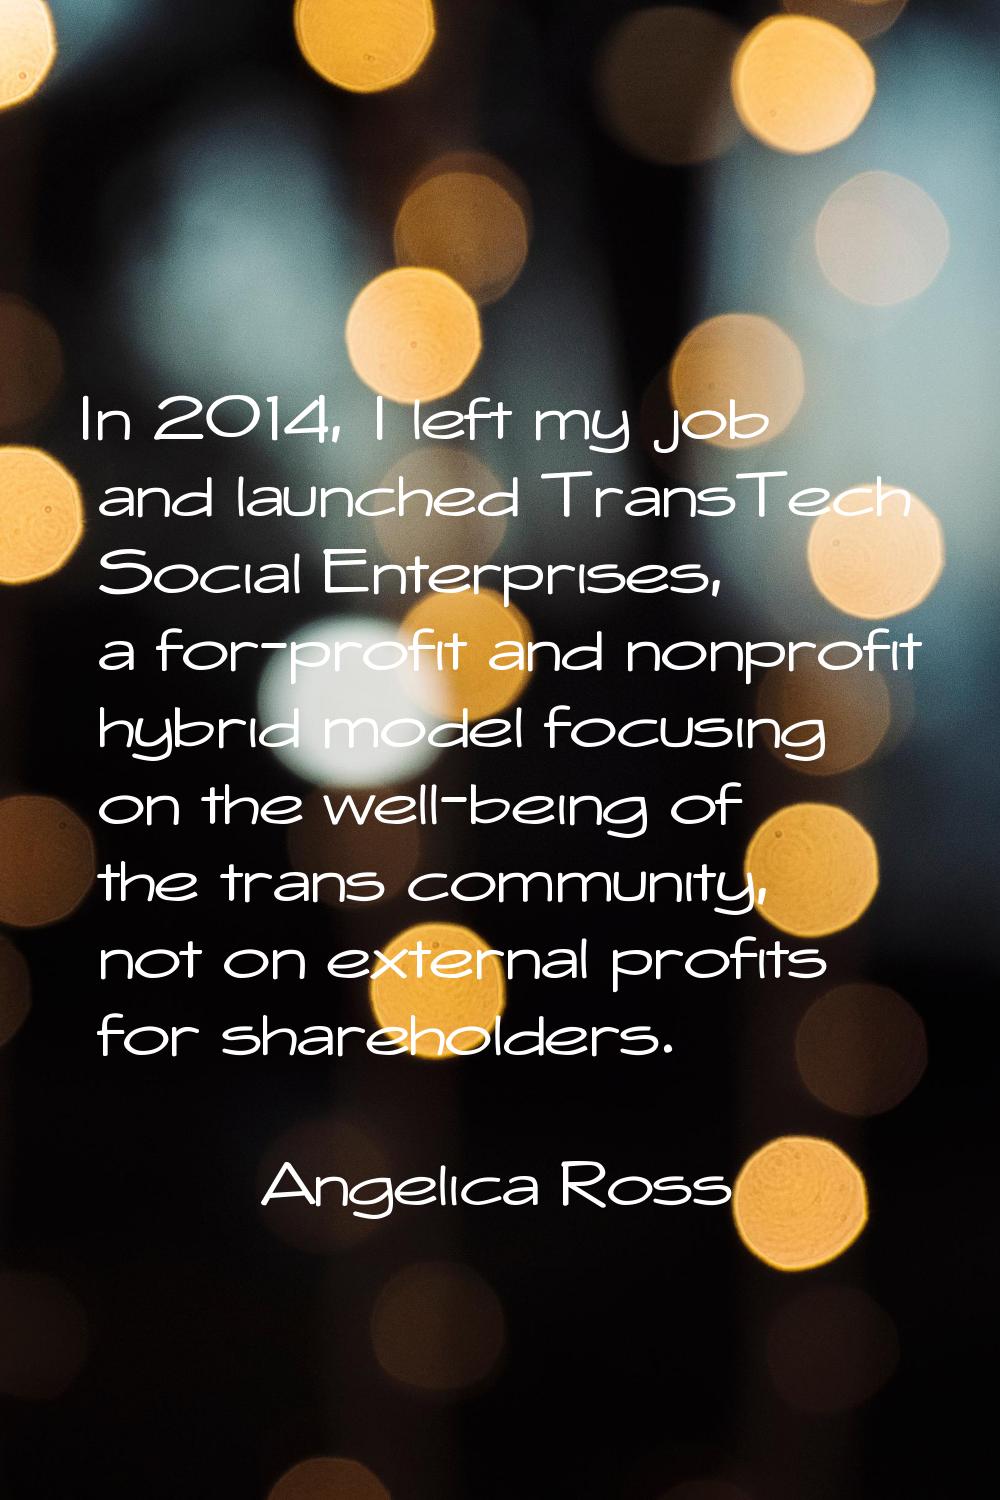 In 2014, I left my job and launched TransTech Social Enterprises, a for-profit and nonprofit hybrid